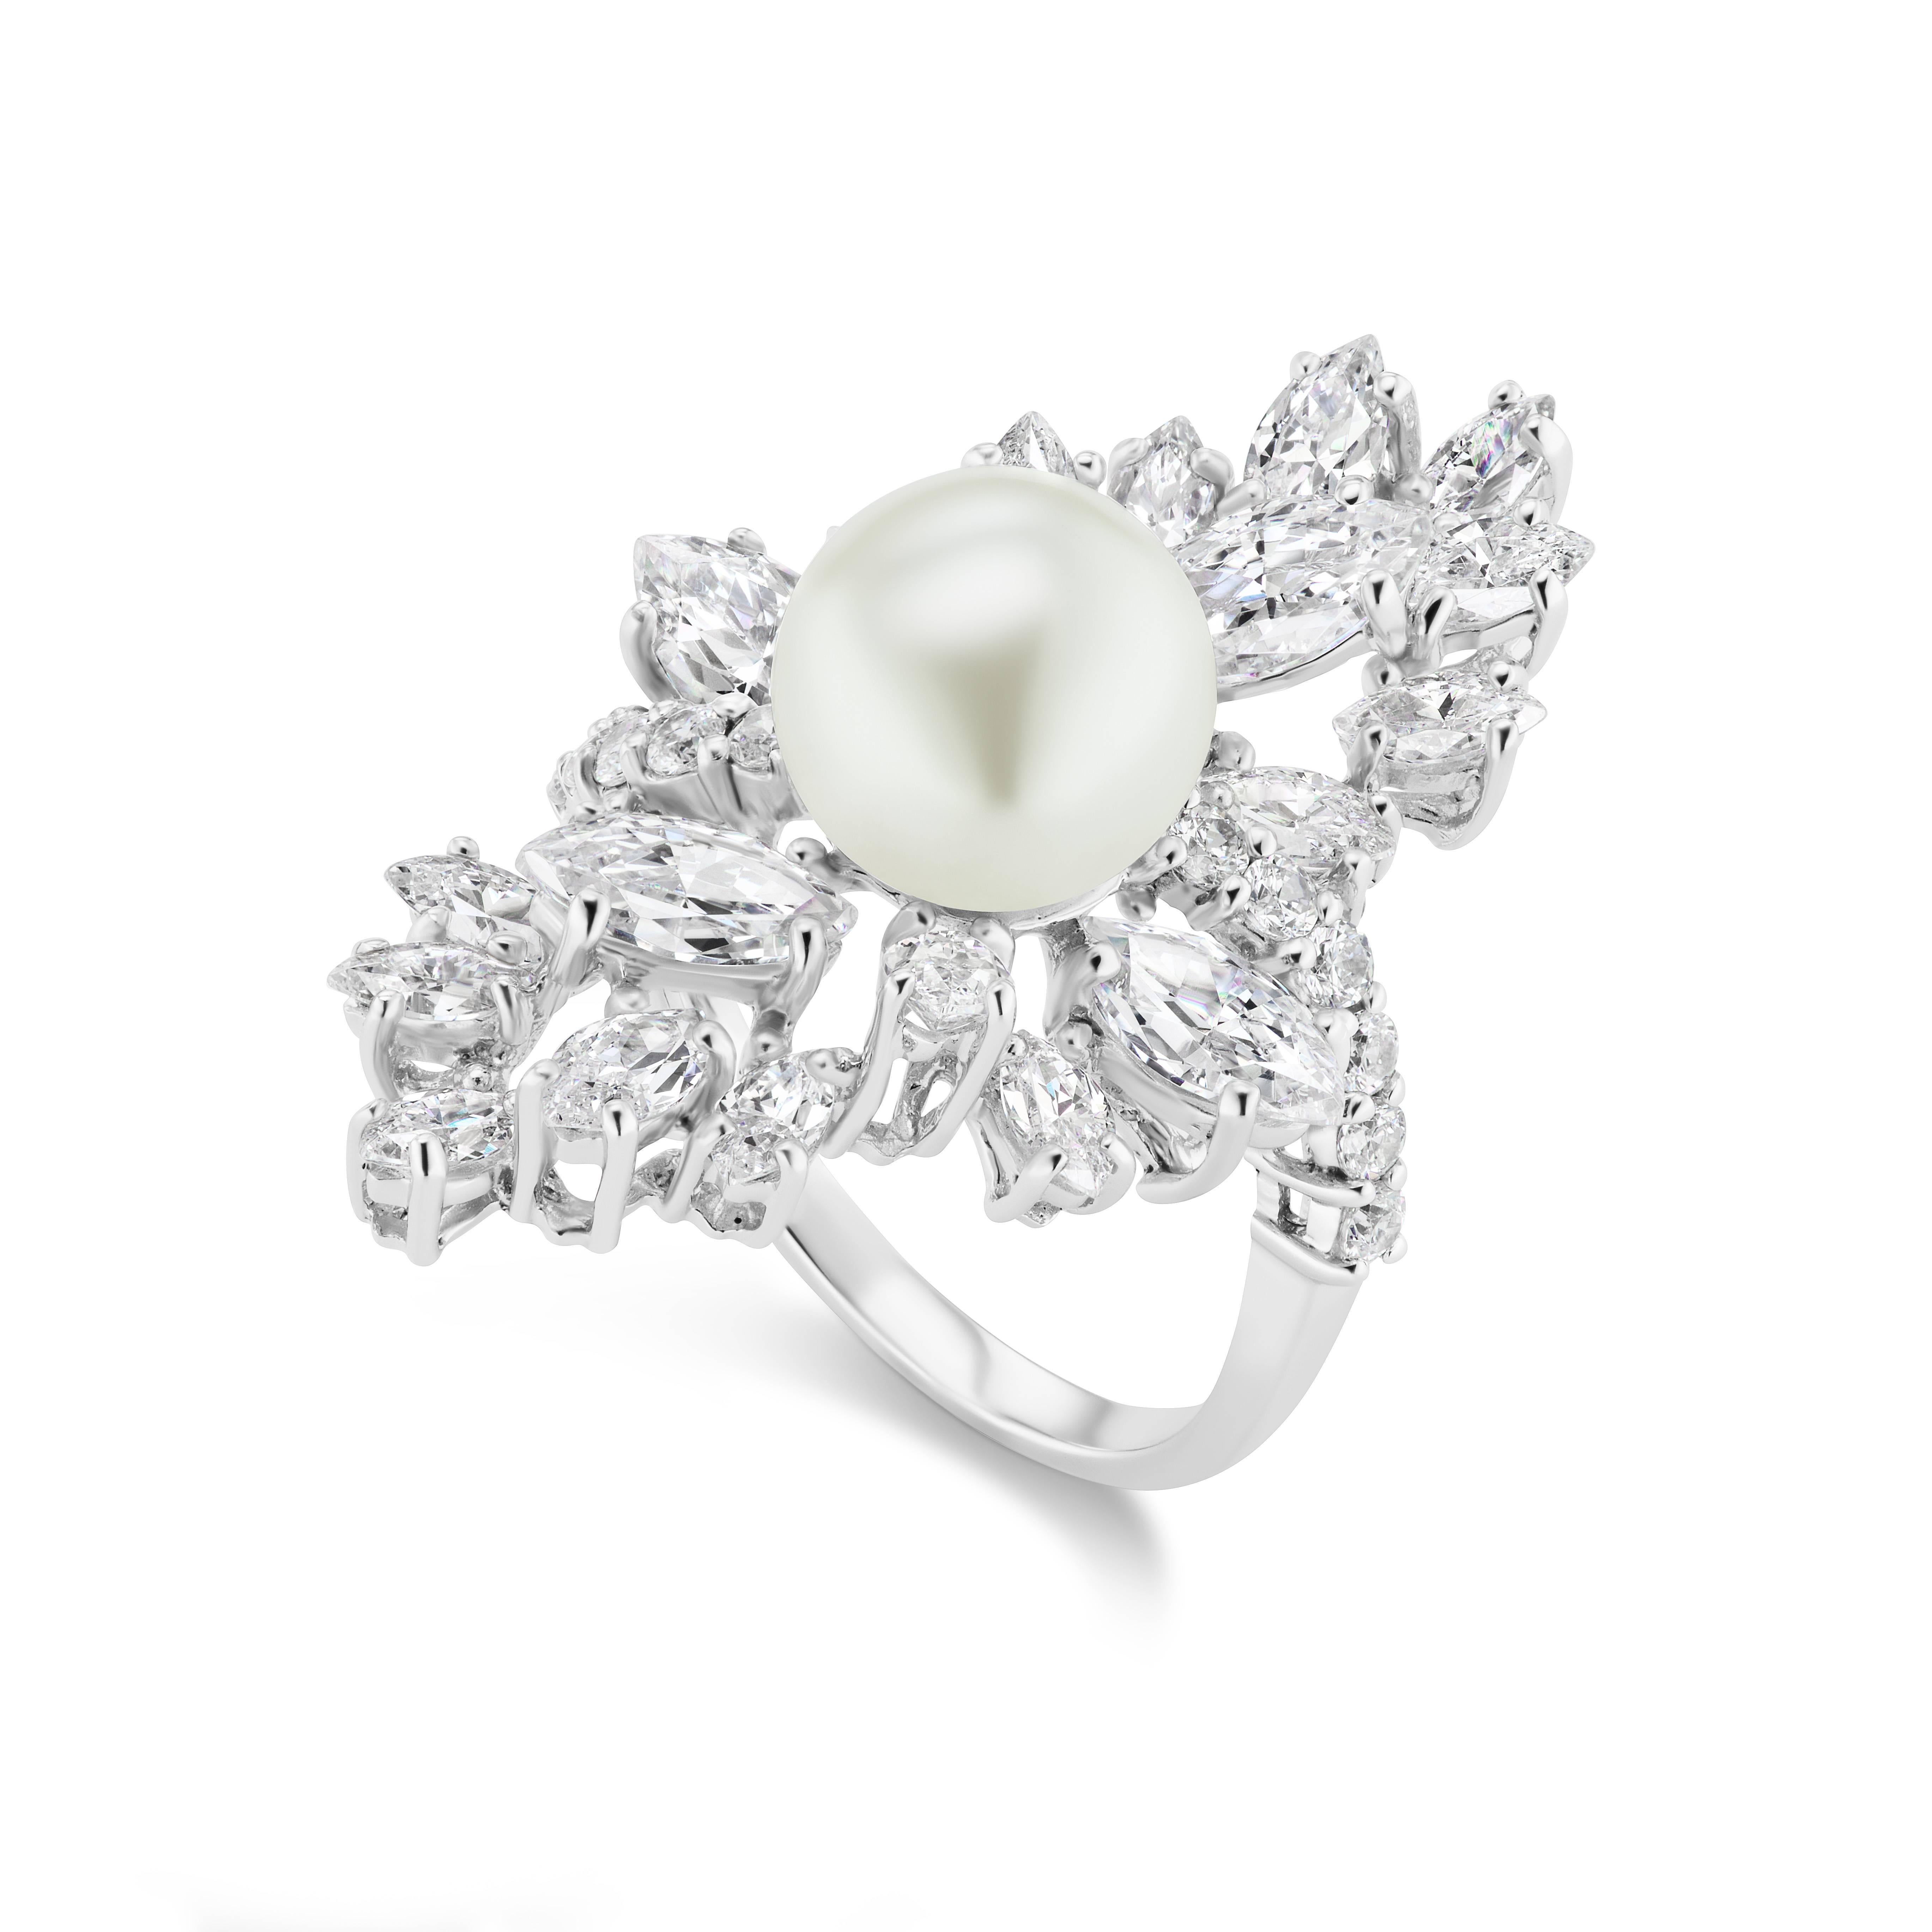 Magnificent  Costume Jewelry Faux Diamond Pearl Freeform Style Cocktail Ring Set With Petite CZ Marquises And Rounds On the Sides Centering A 10mm Faux Pearl Set In Rhodium Sterling. Free Sizing 